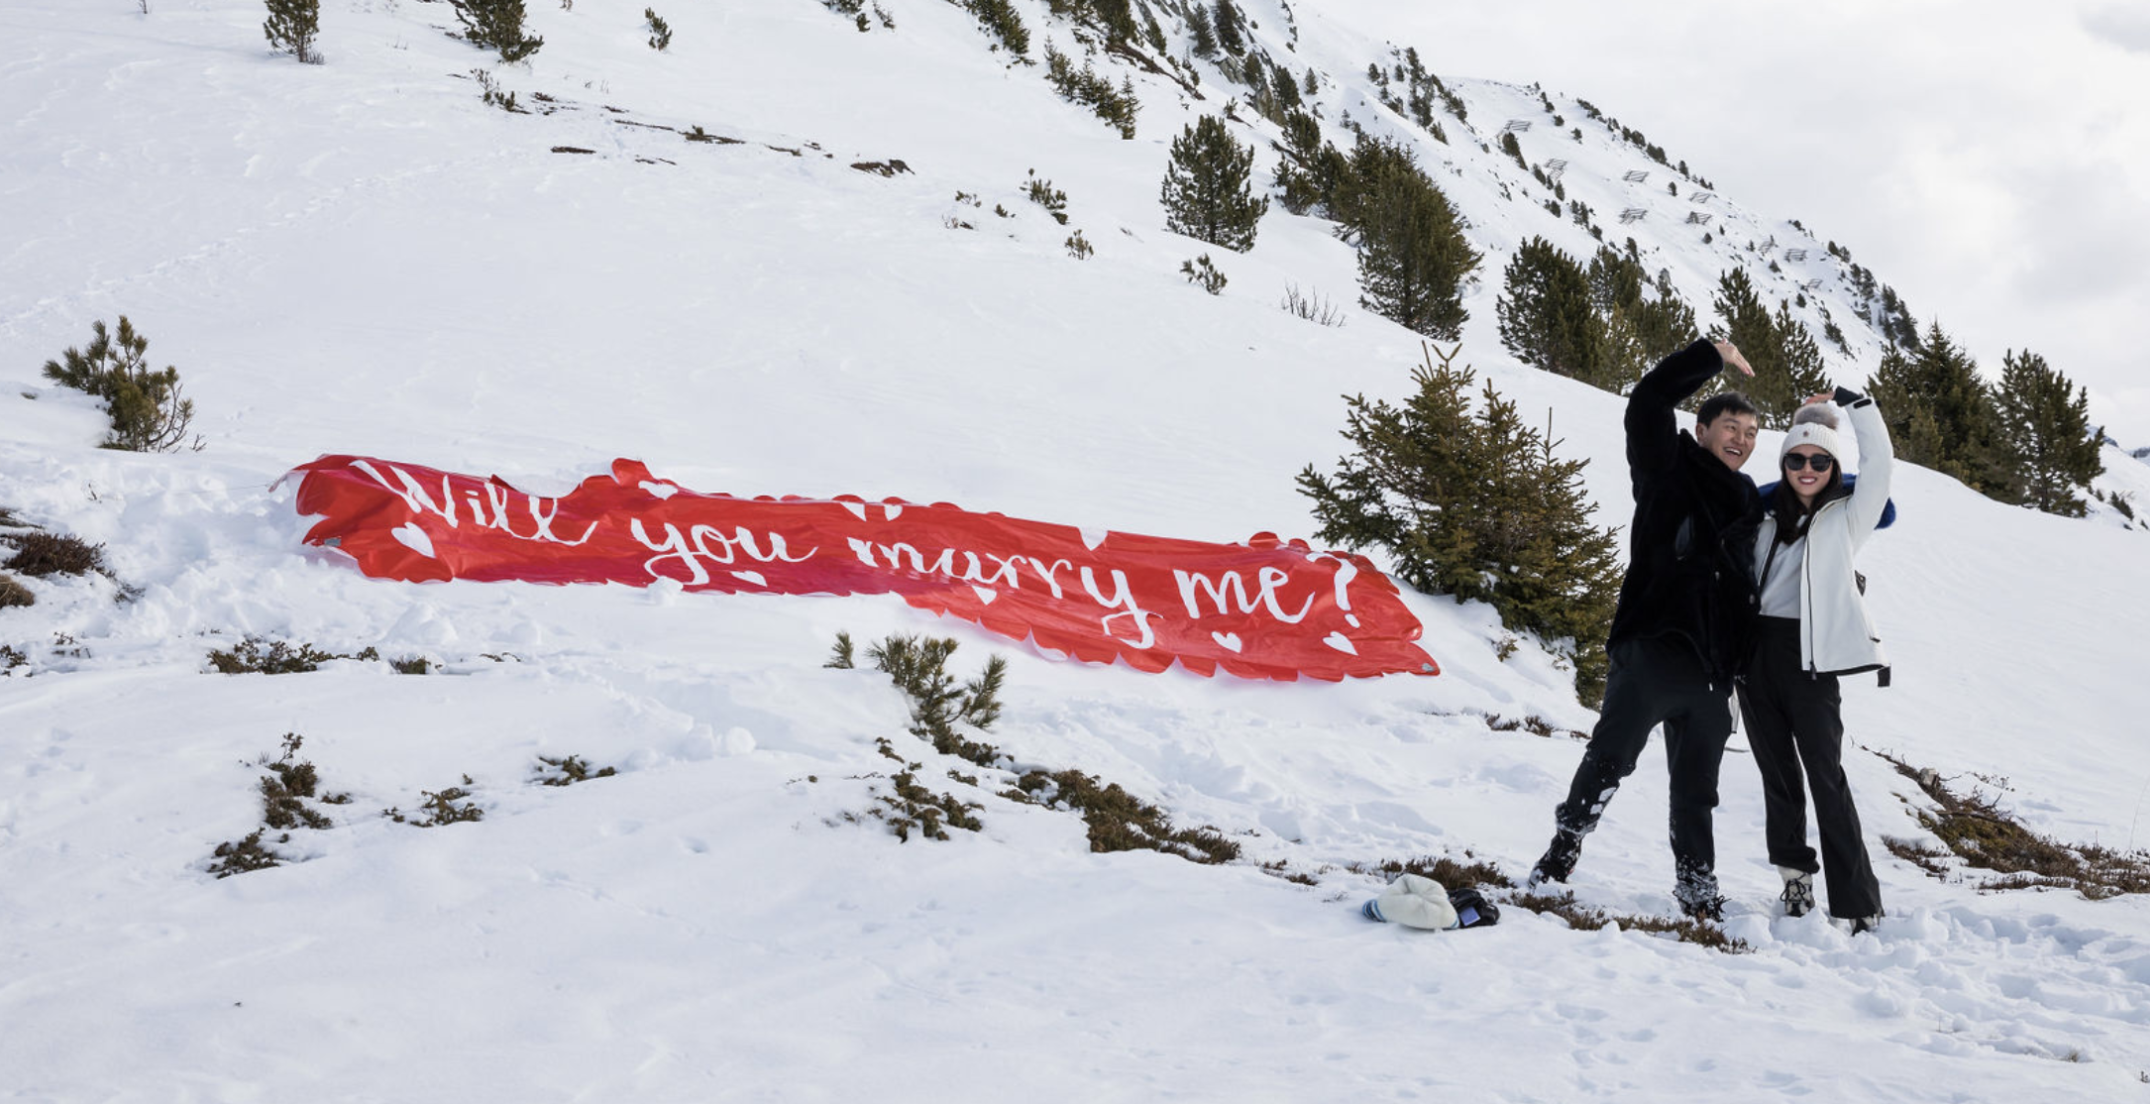 24 Things to do as a couple in Verbier during Valentine’s week